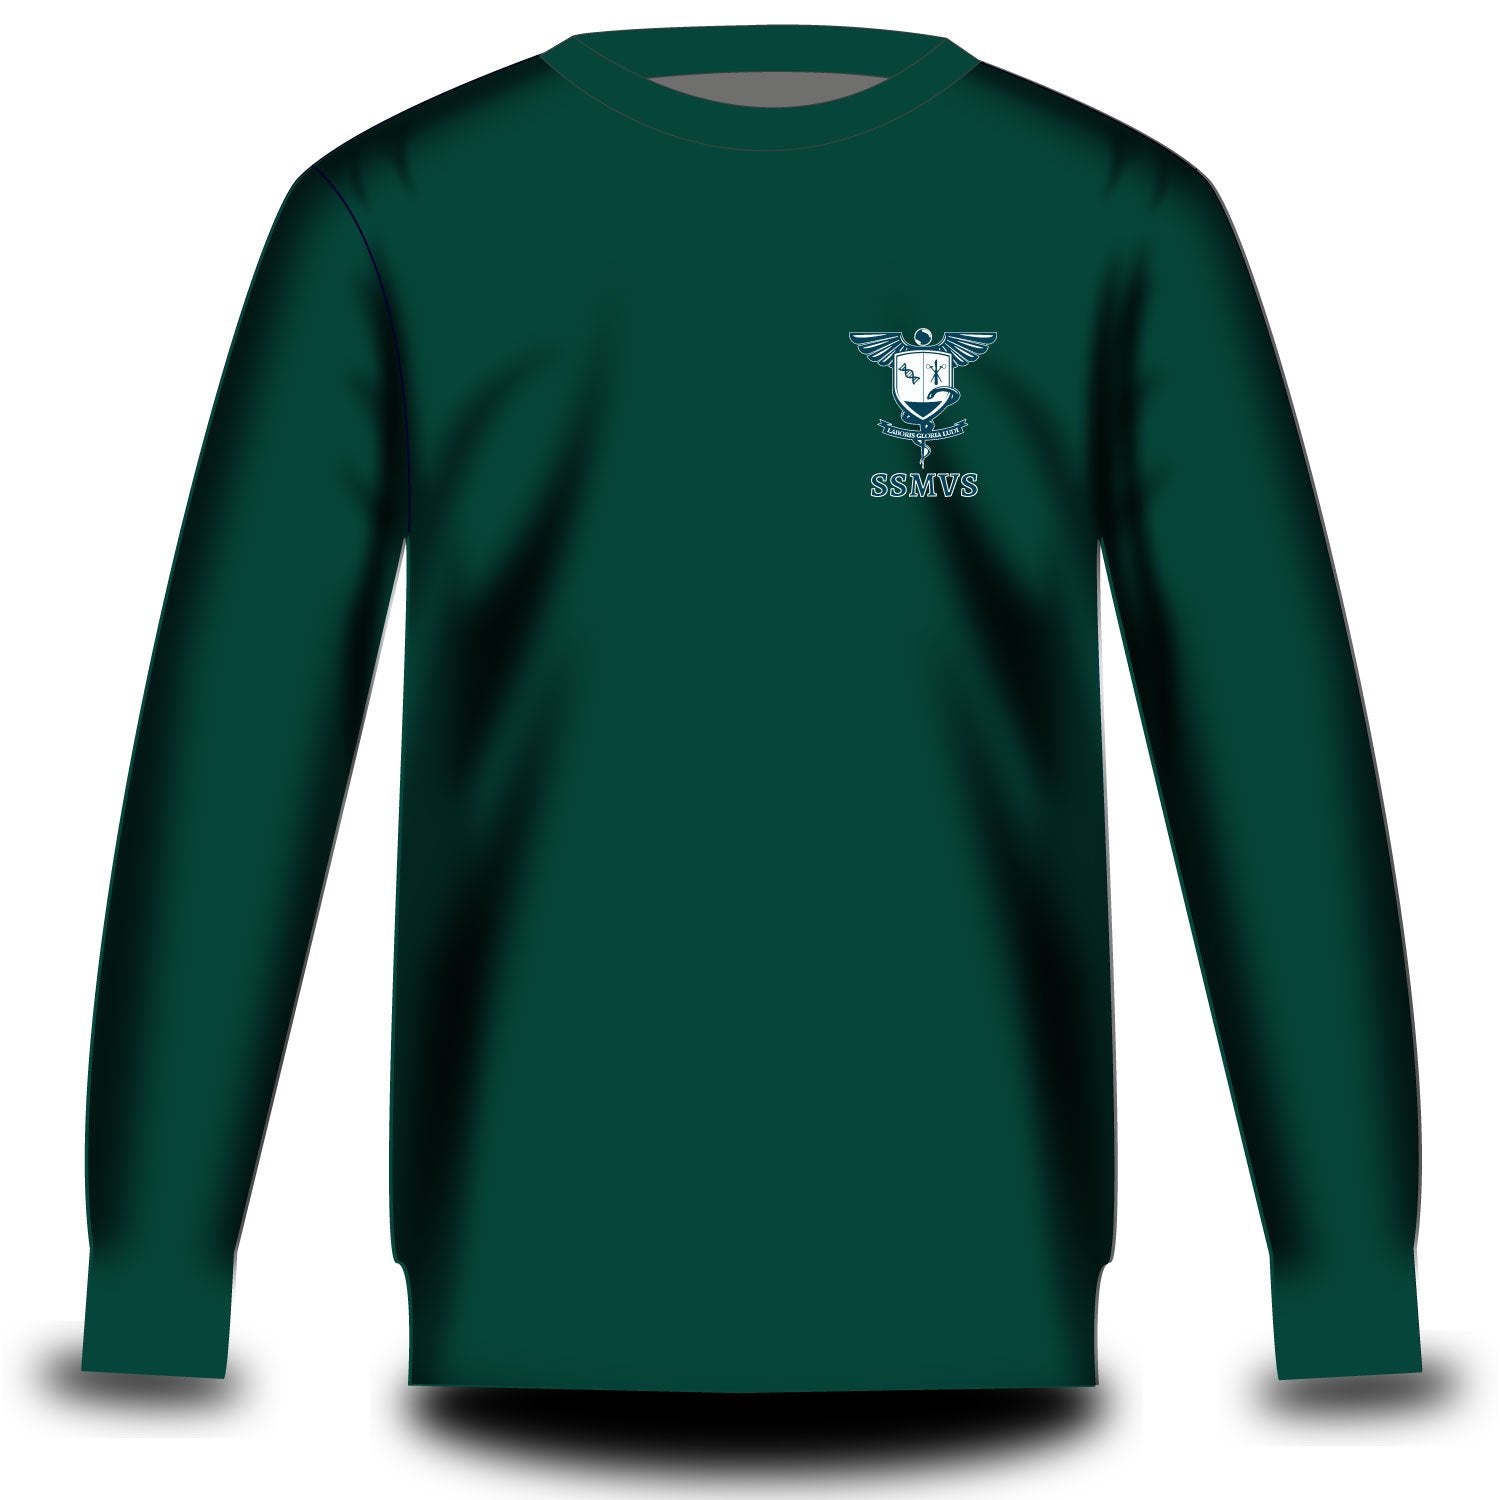 sidney sussex medical and veterinary society sweatshirt bottle green